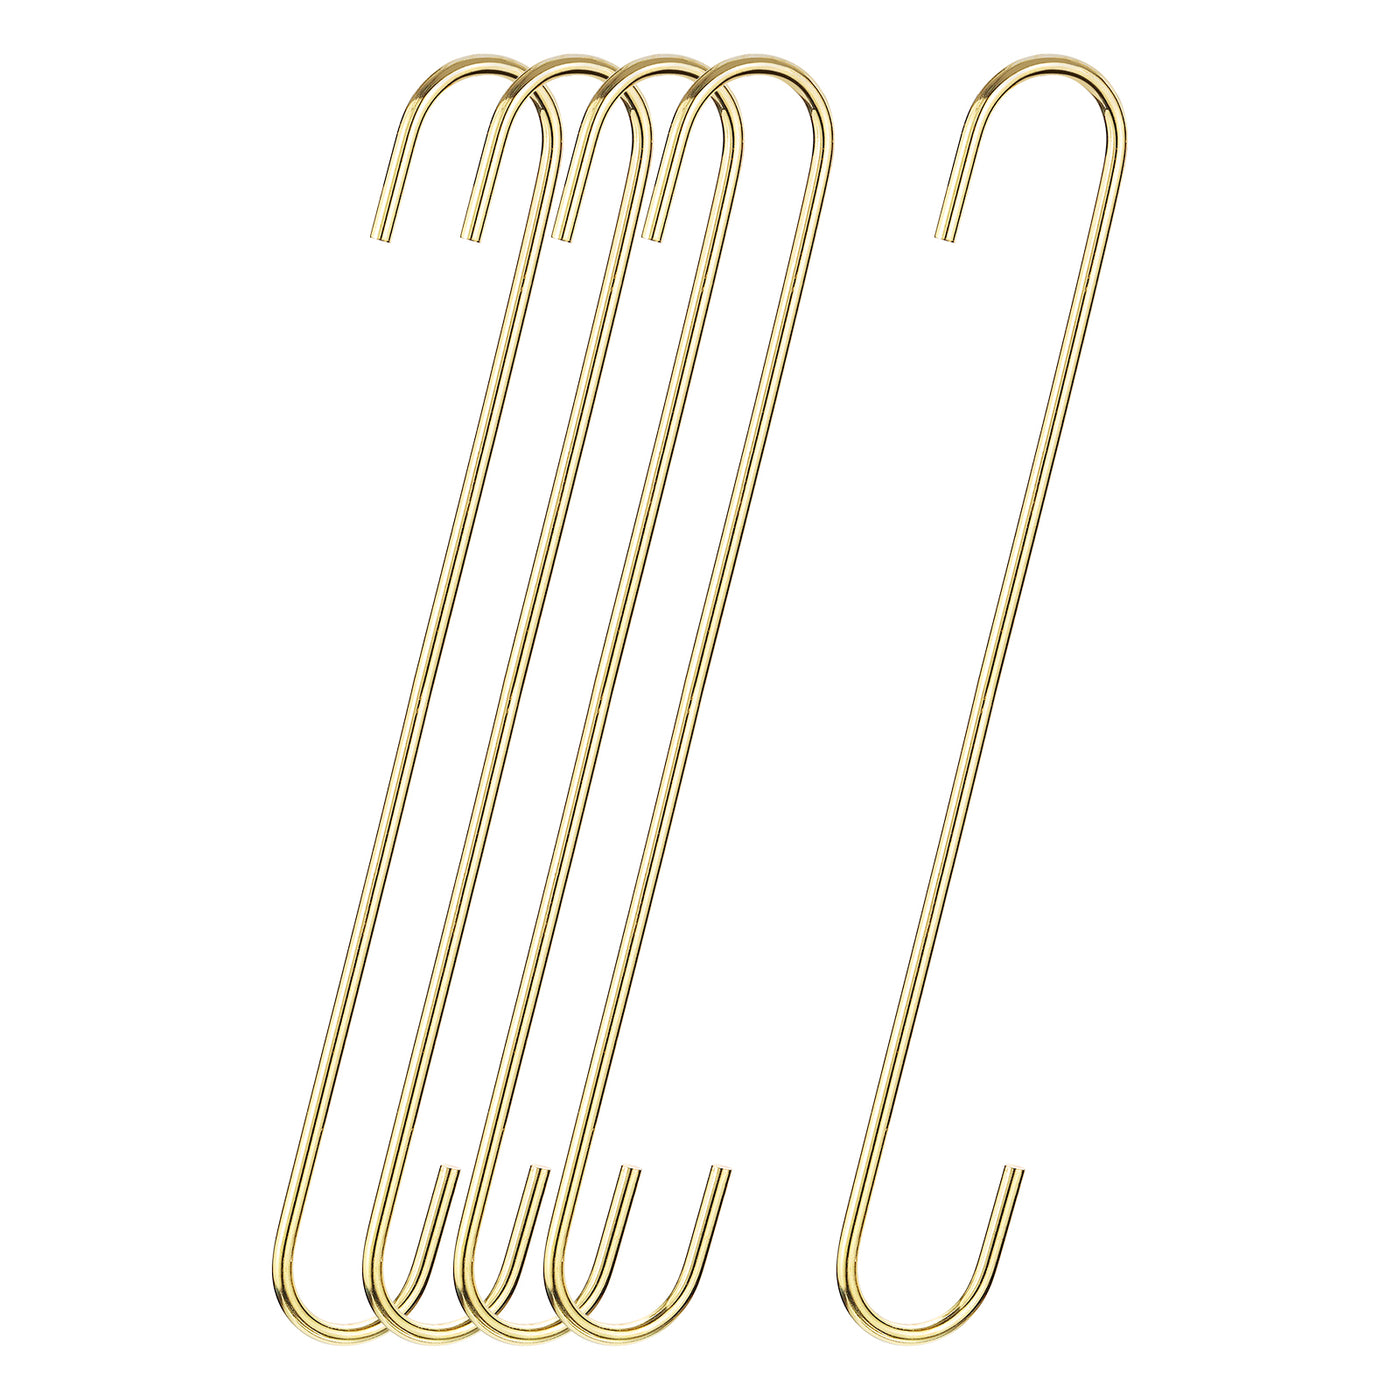 uxcell Uxcell S Hanging Hooks, 12inch(300mm) Extra Long Steel Hanger, Indoor Outdoor Uses for Garden, Bathroom, Closet, Workshop, Kitchen, Gold Tone, 5Pcs